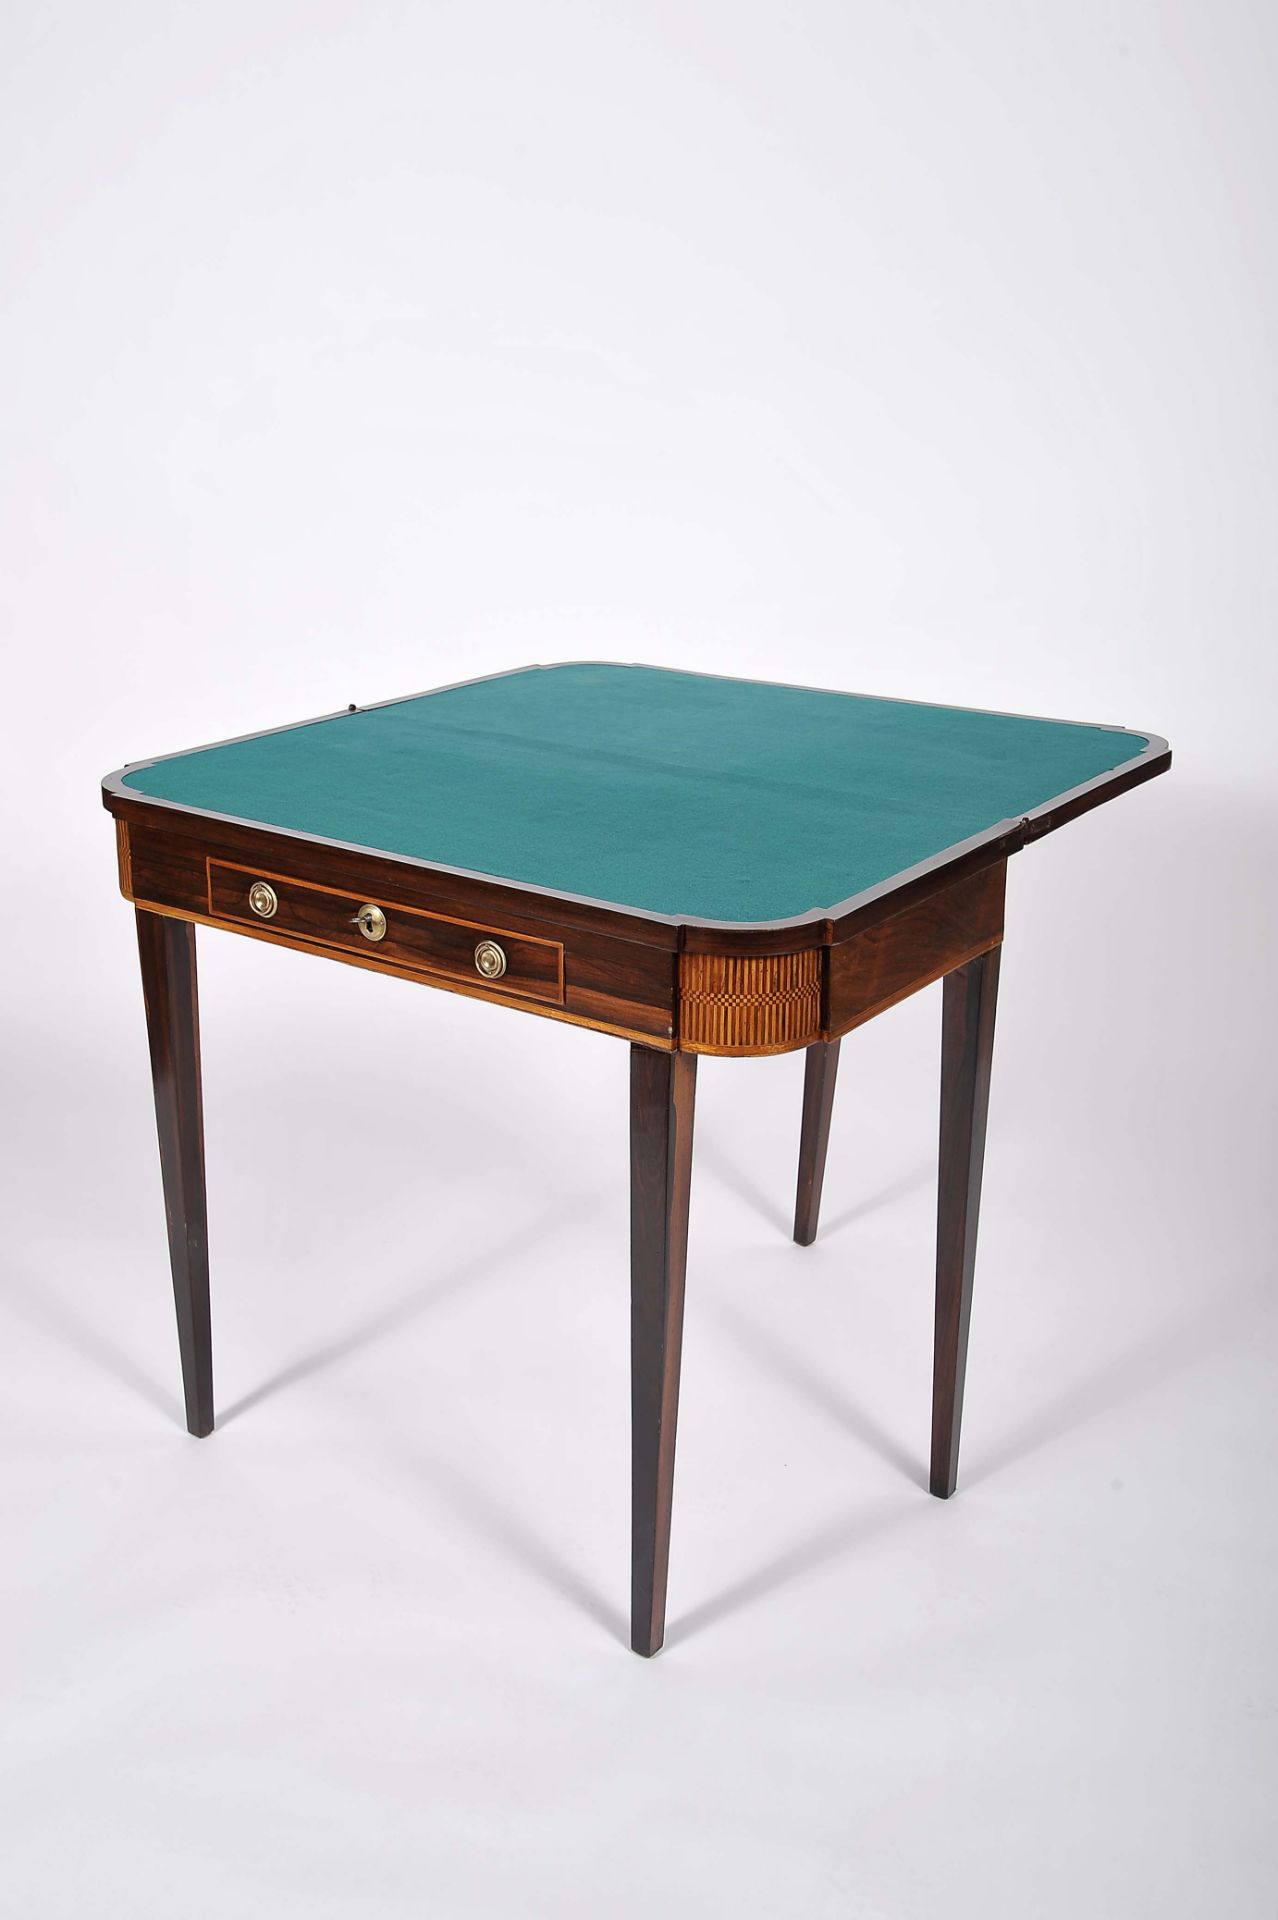 A game table with drawer - Bild 3 aus 3